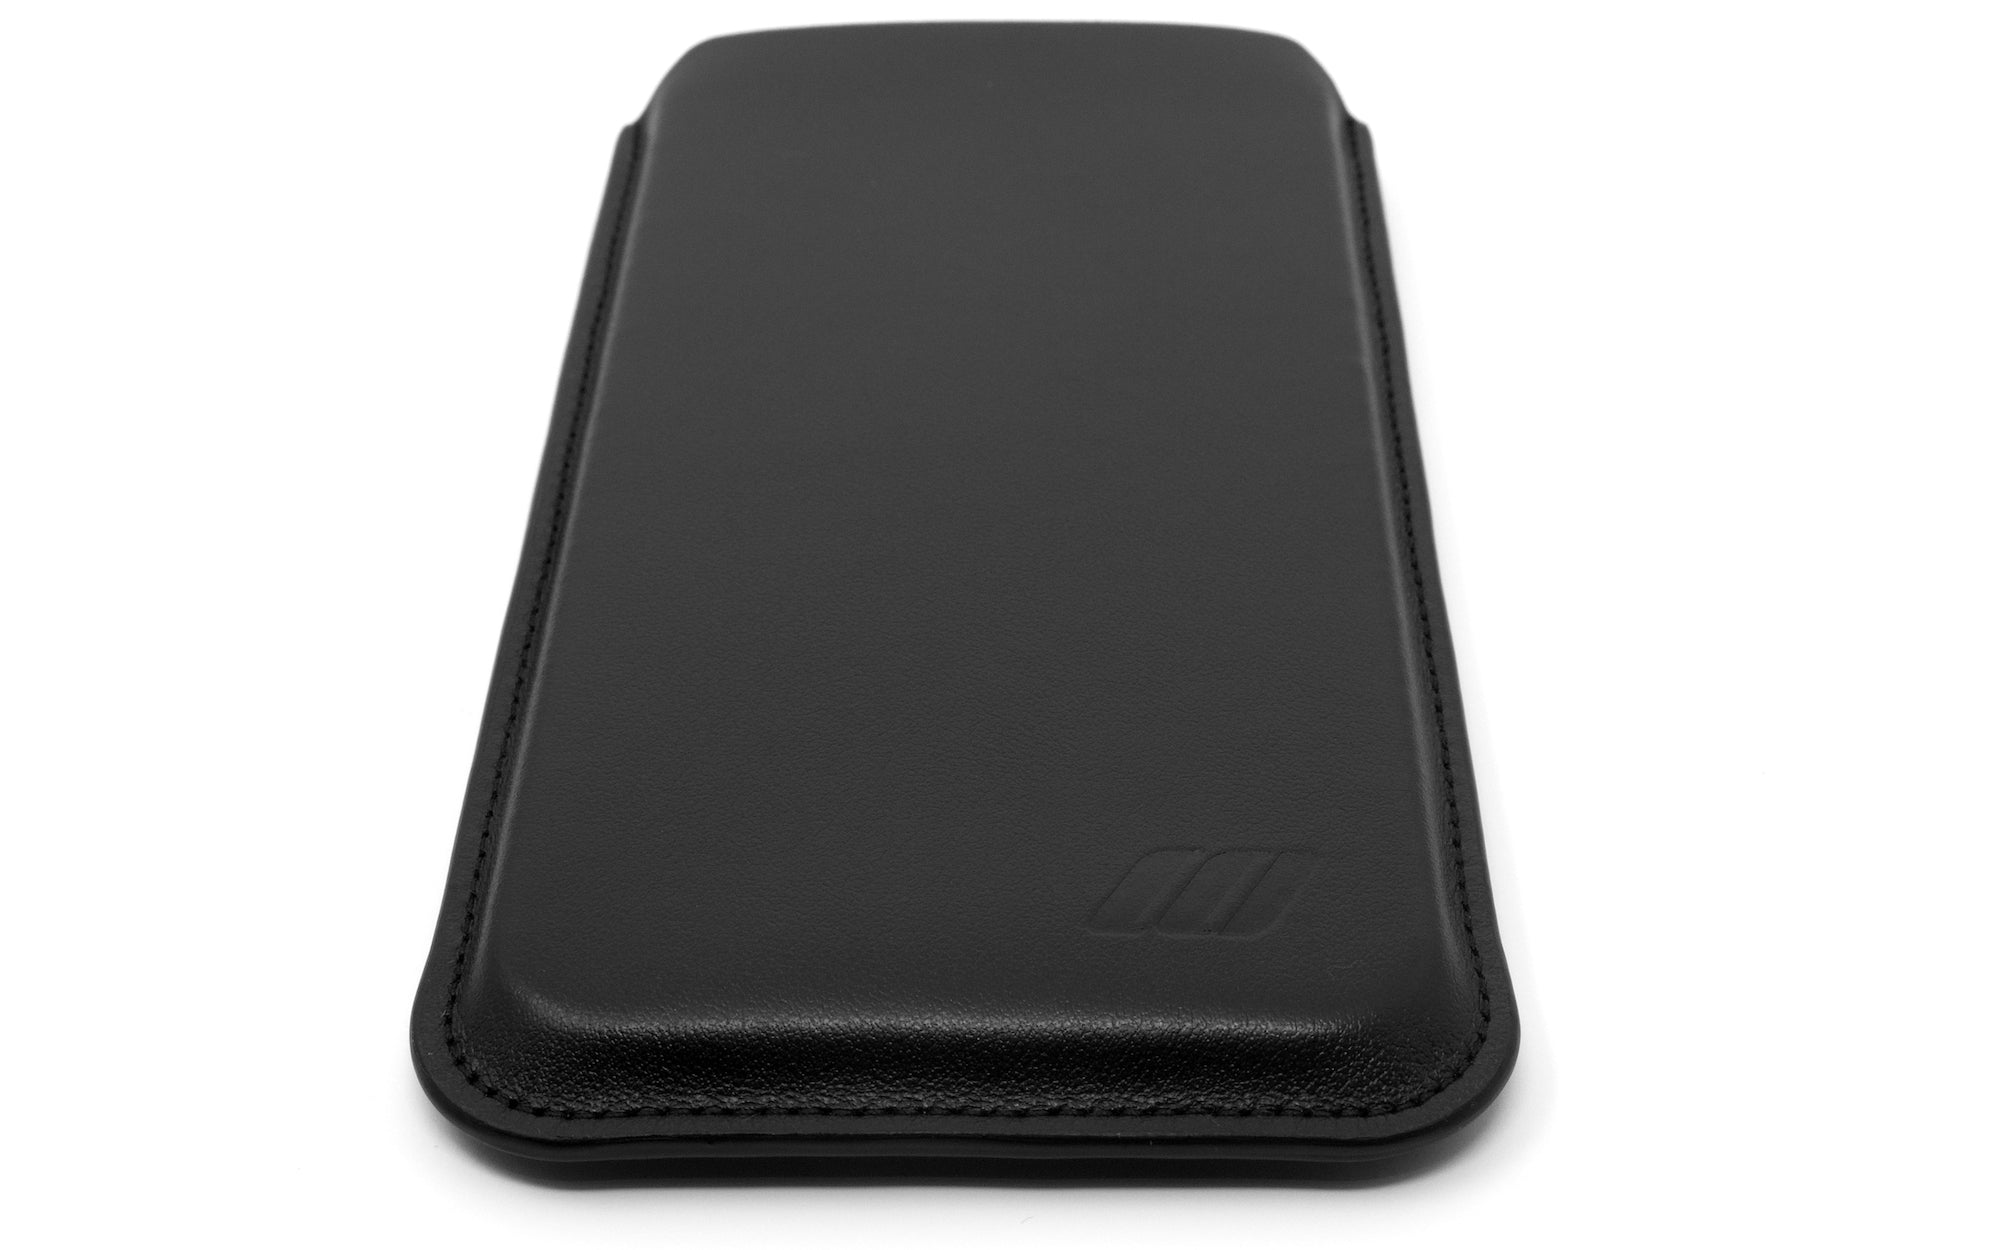 iPhone 12 Mini Leather Case Pouch - Skinny Fit - Black